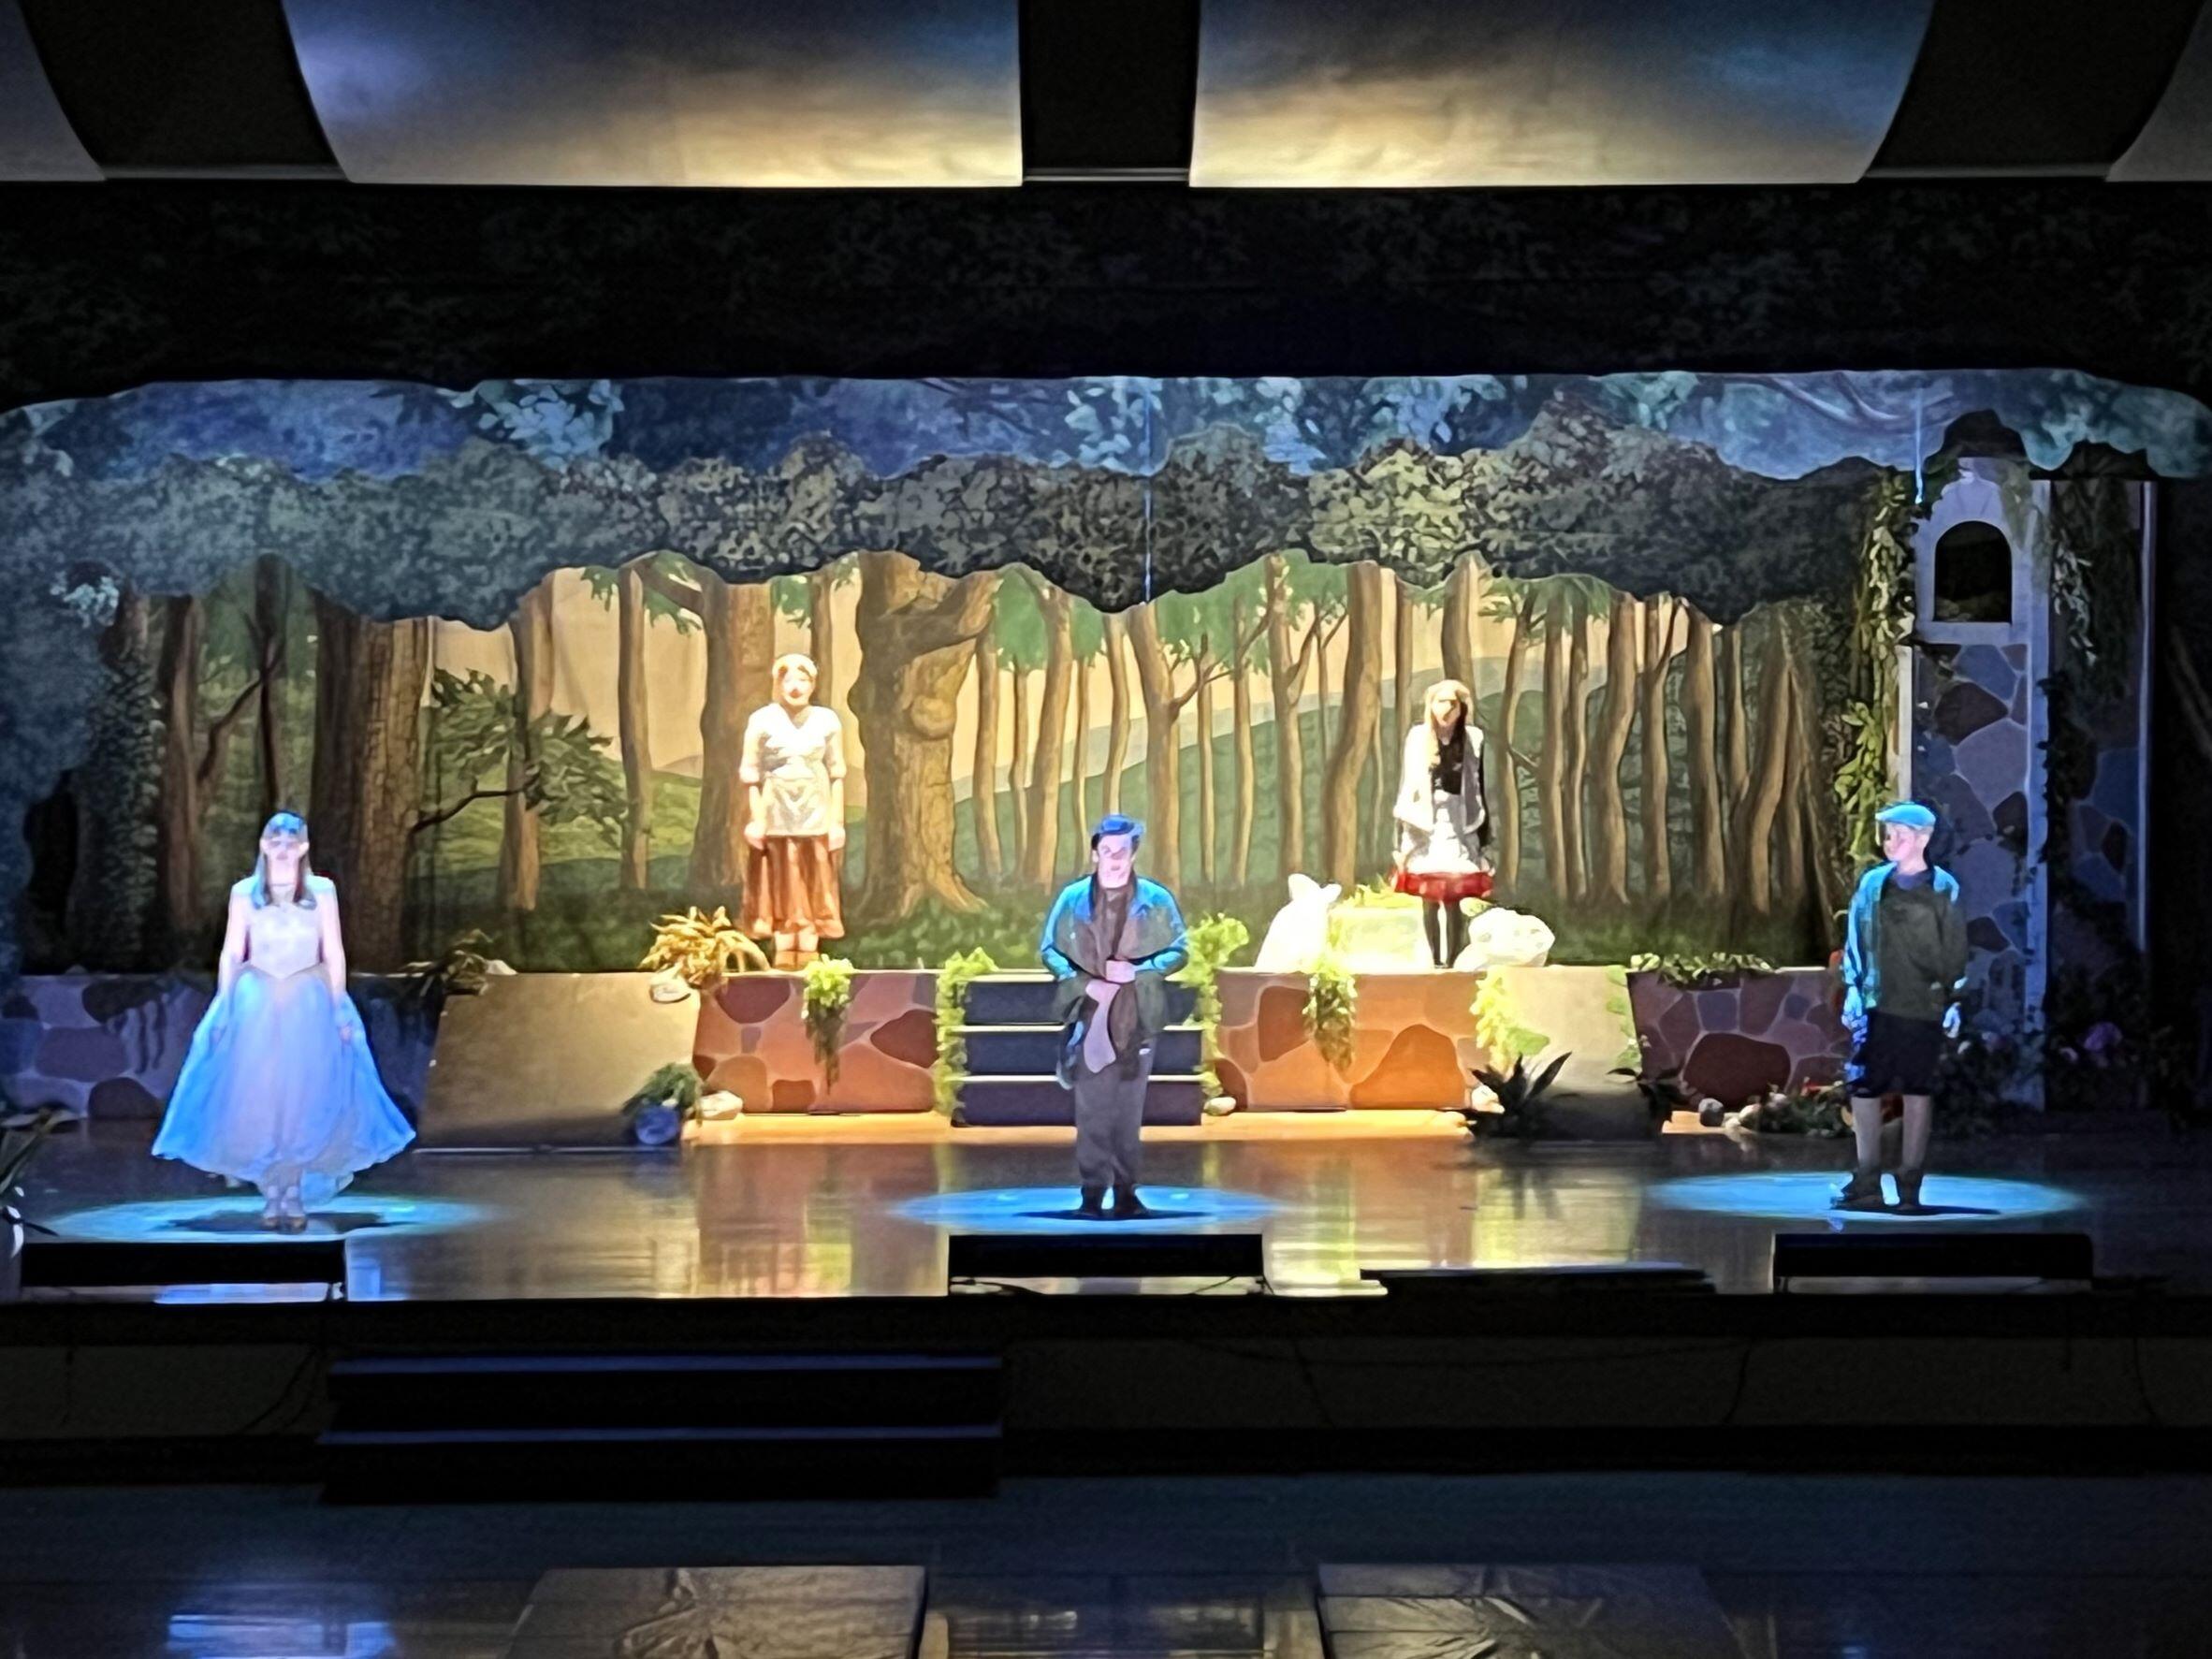 Five Students performing in school play, Into the Woods. two in the rear, three up front